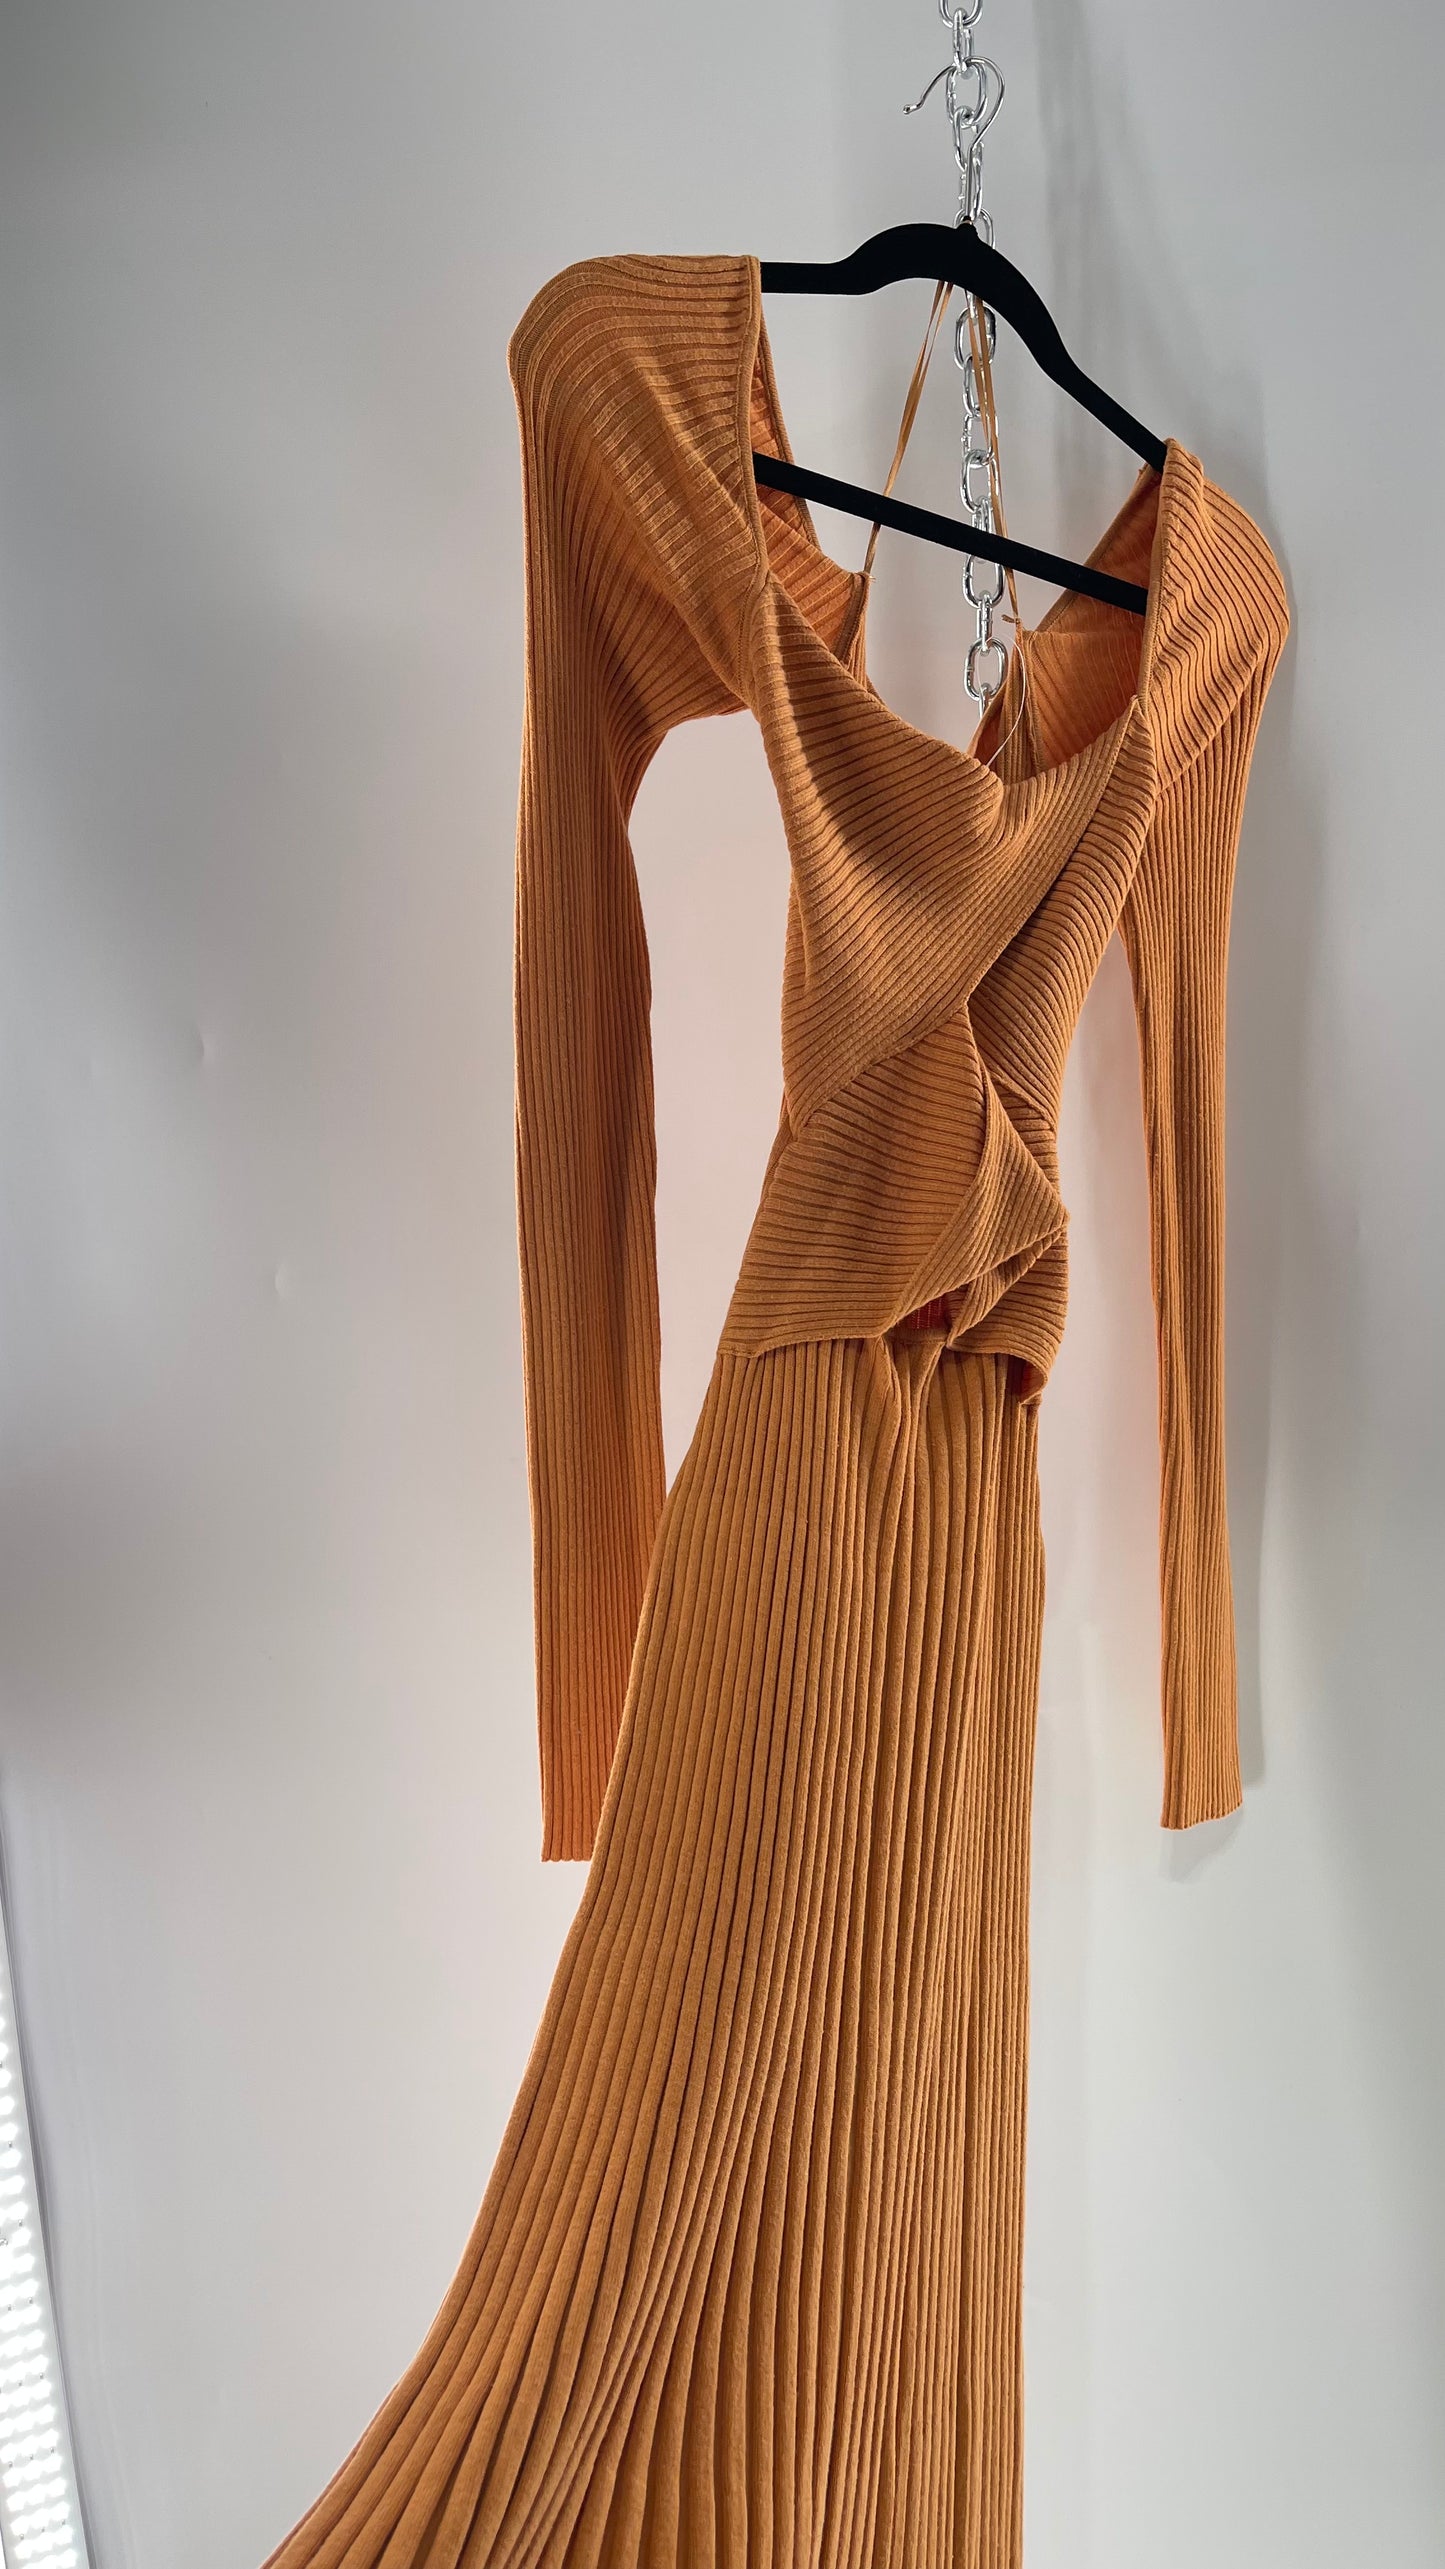 Free People Orange Ribbed Knit Maxi Dress with Cross Over Exposed Midriff Dress (Medium)